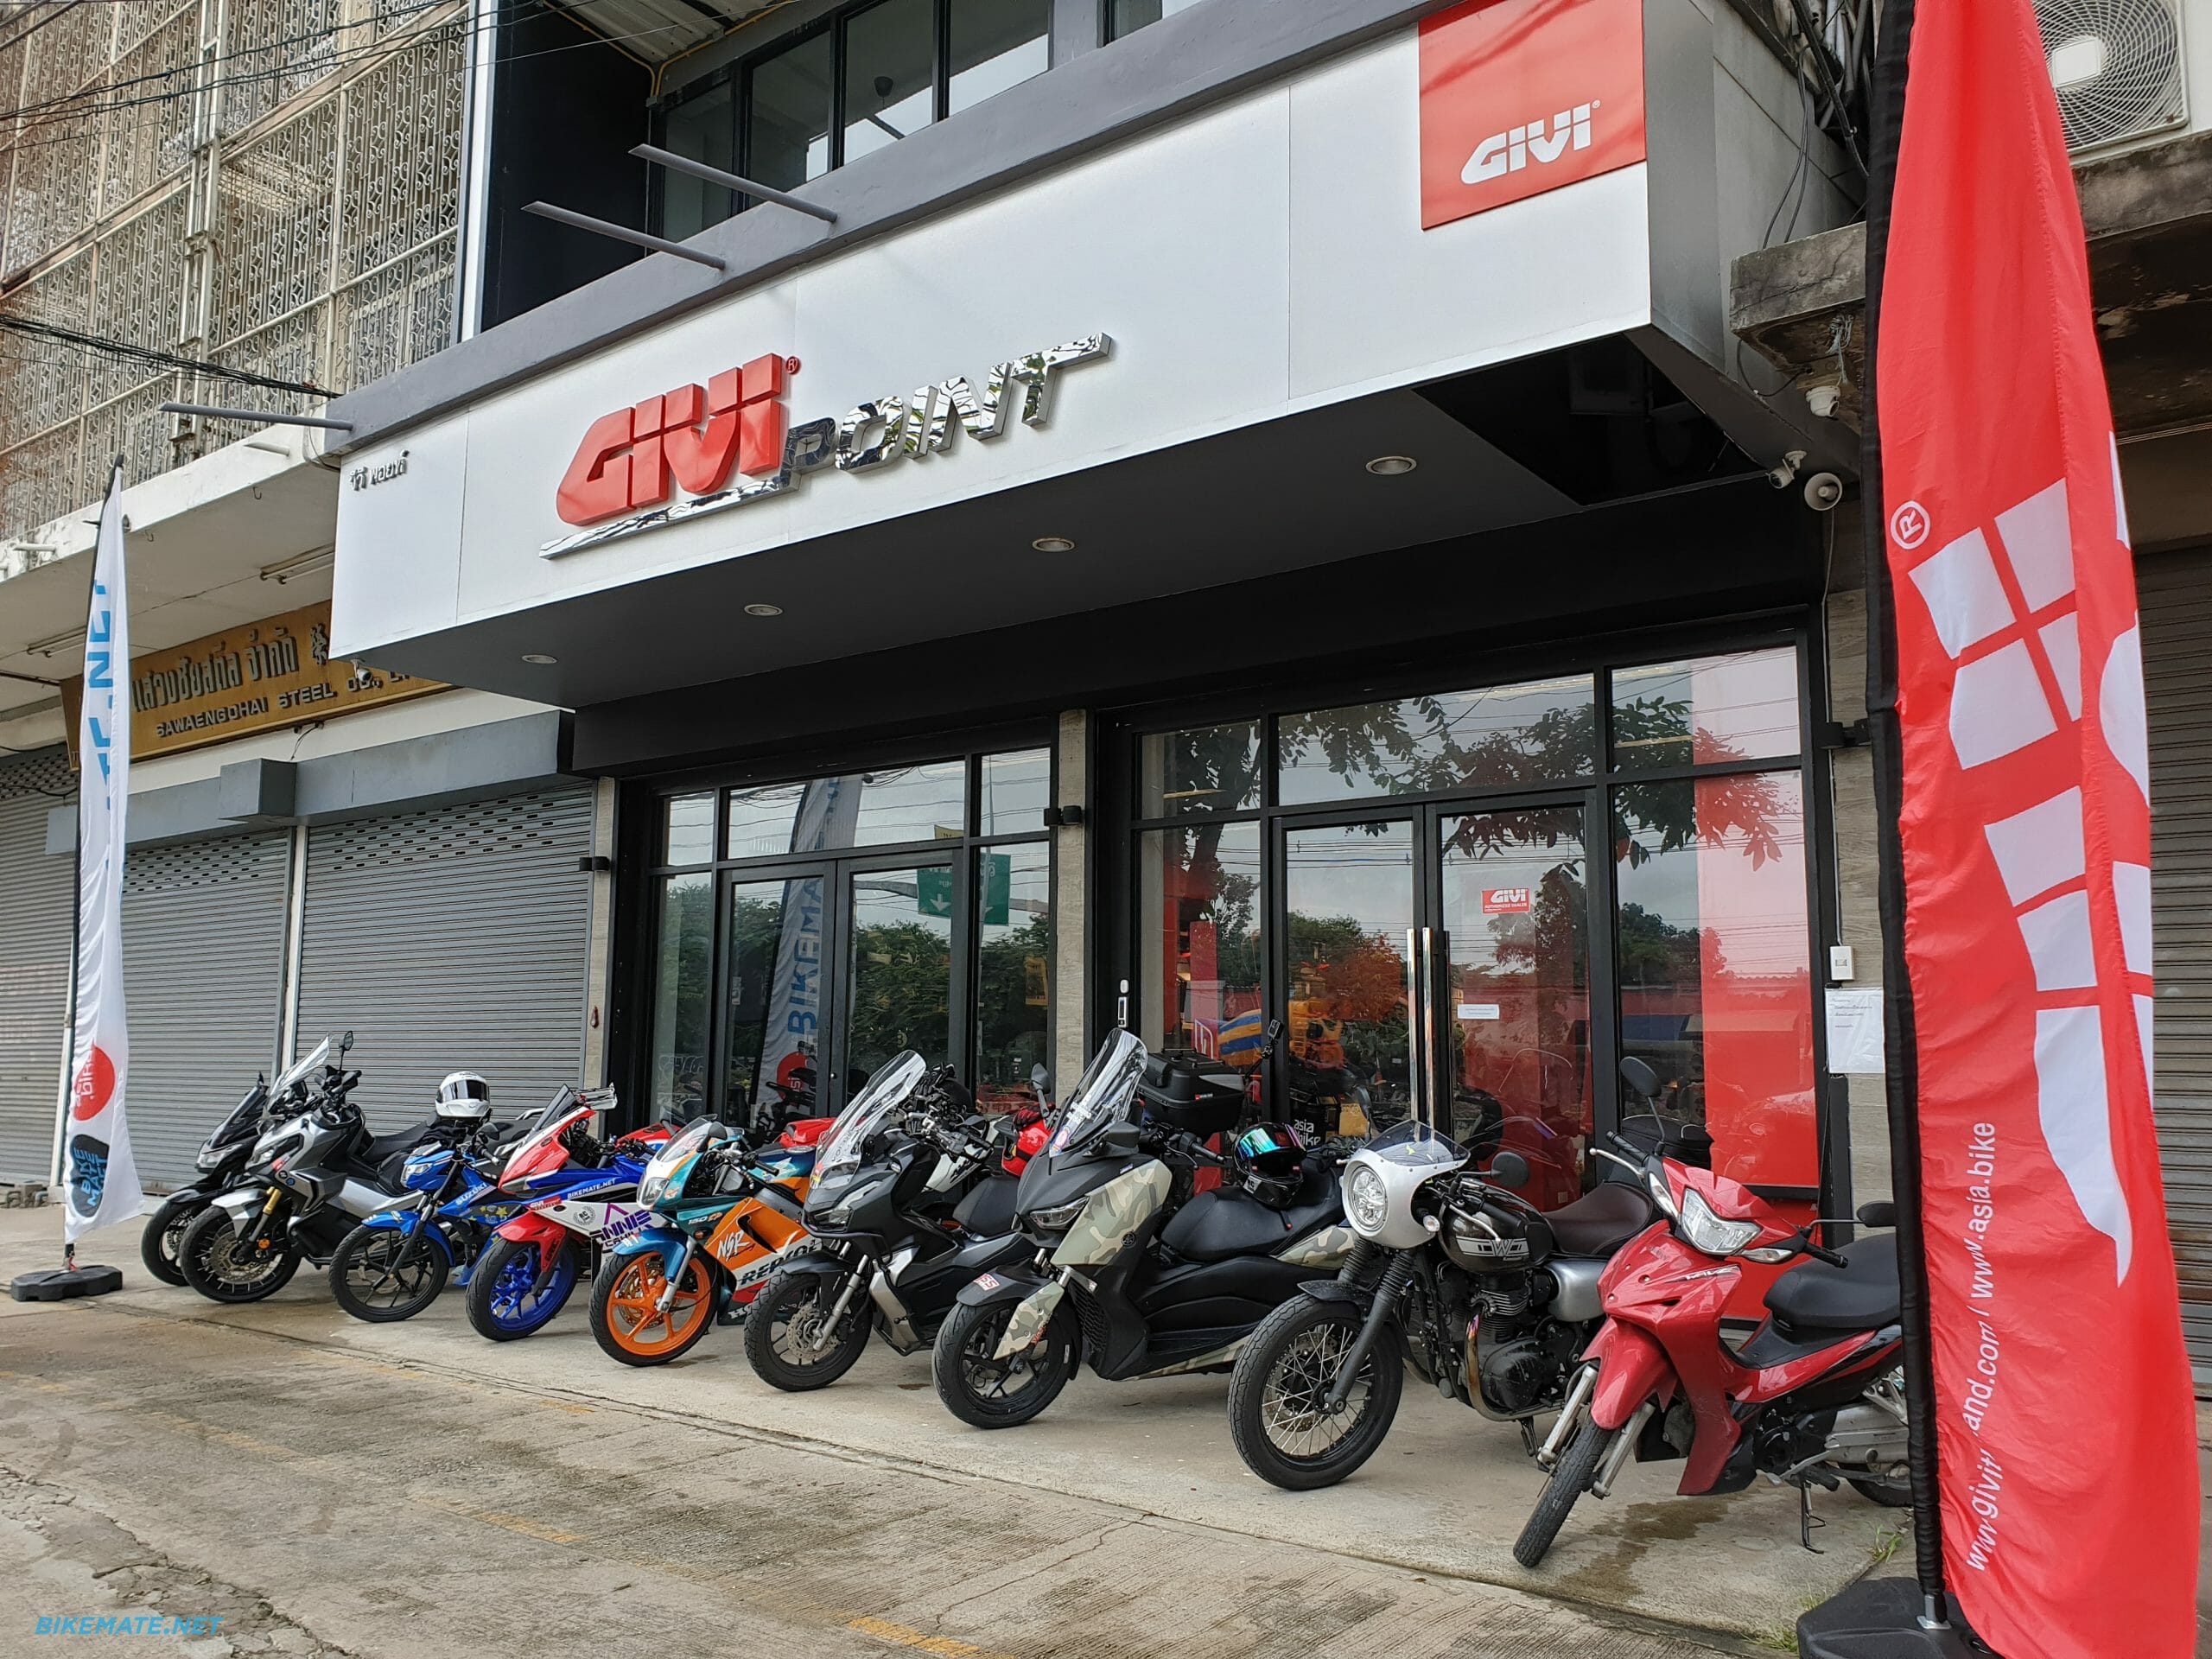 GIVI Point Store Front with motorcycles